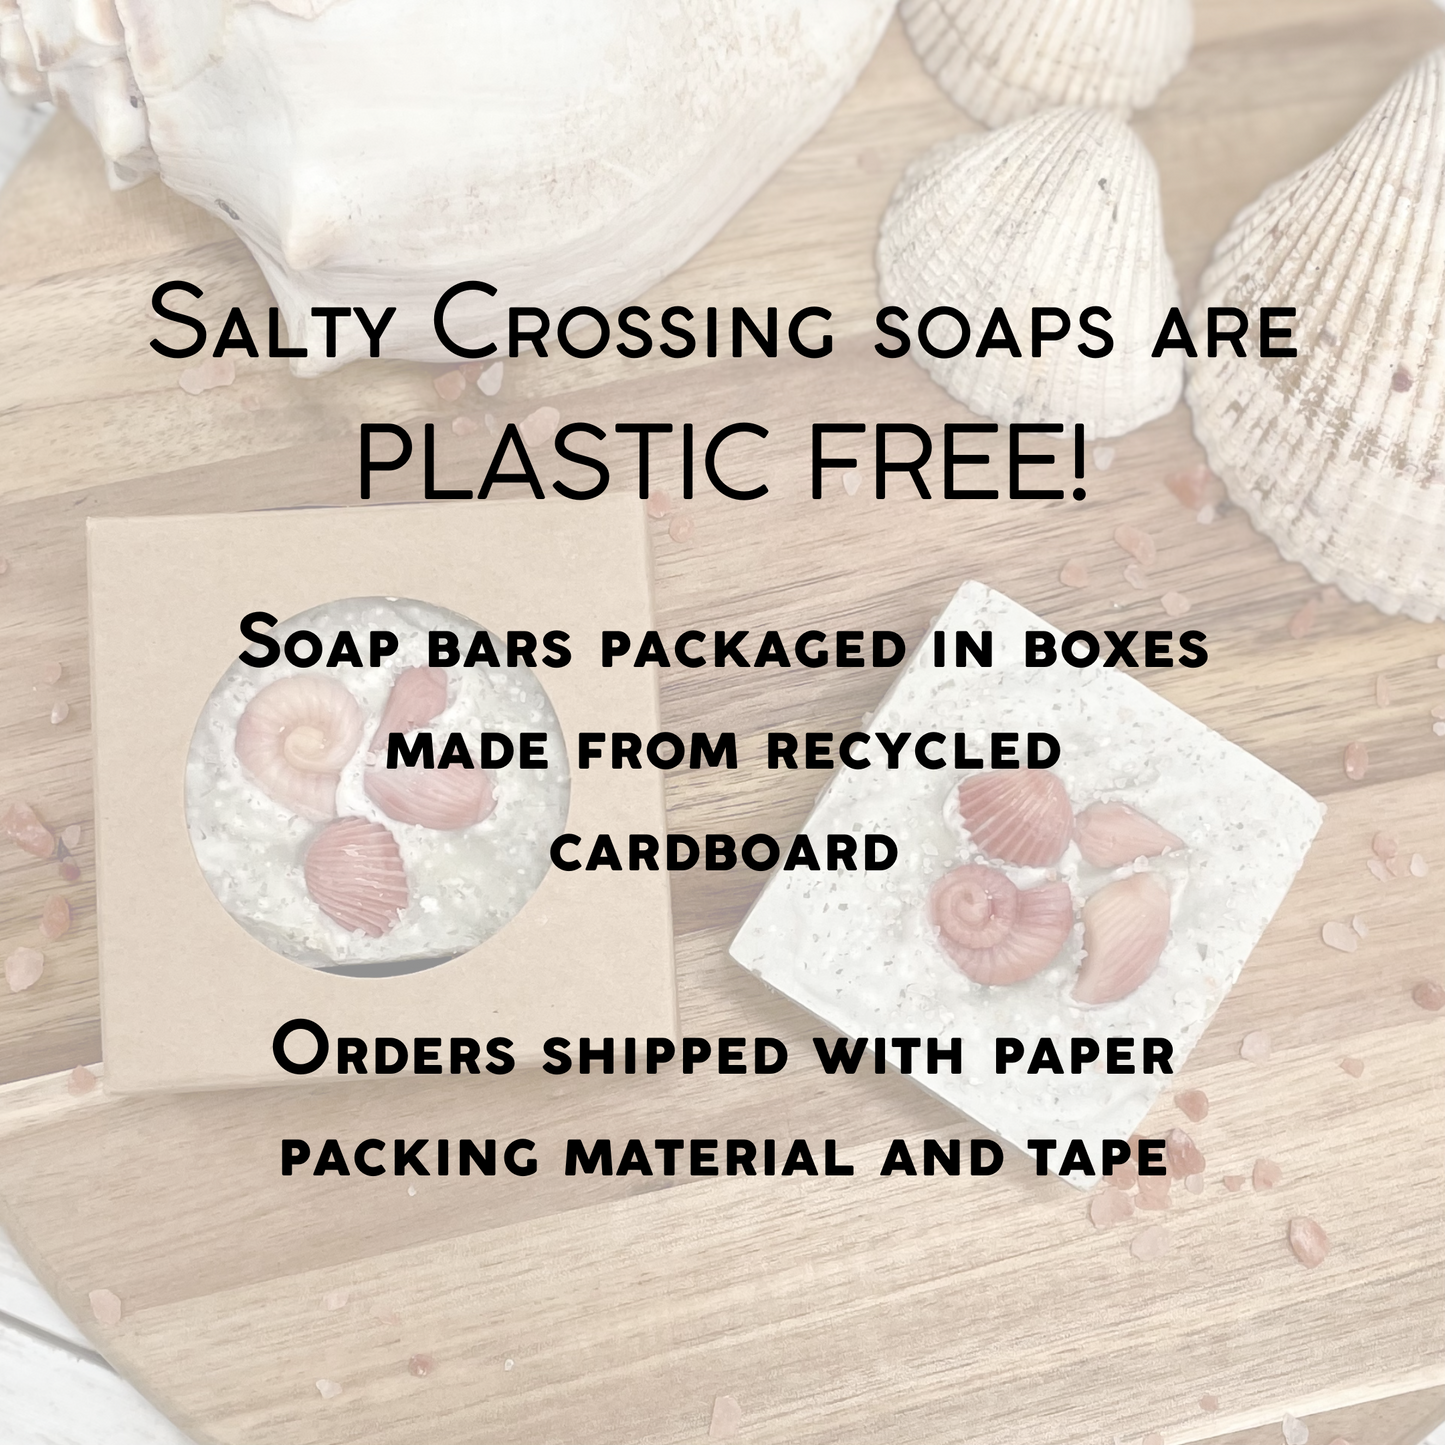 Graphic with text- Salty Crossing soaps are plastic free. Soap bars packaged in boxes made from recycled cardboard and orders shipped with paper packing material and tape.